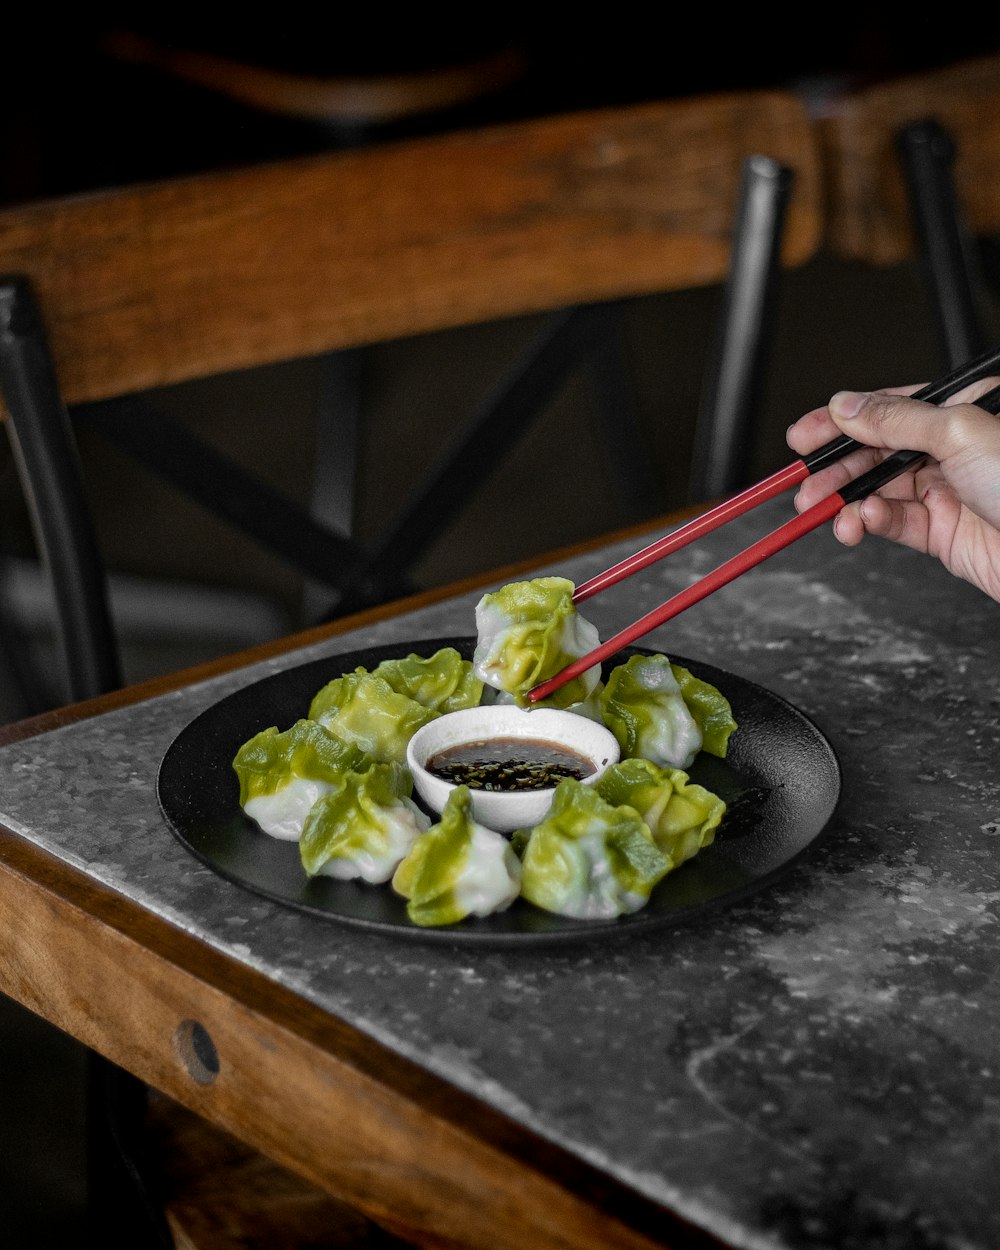 a person holding chopsticks over a plate of food